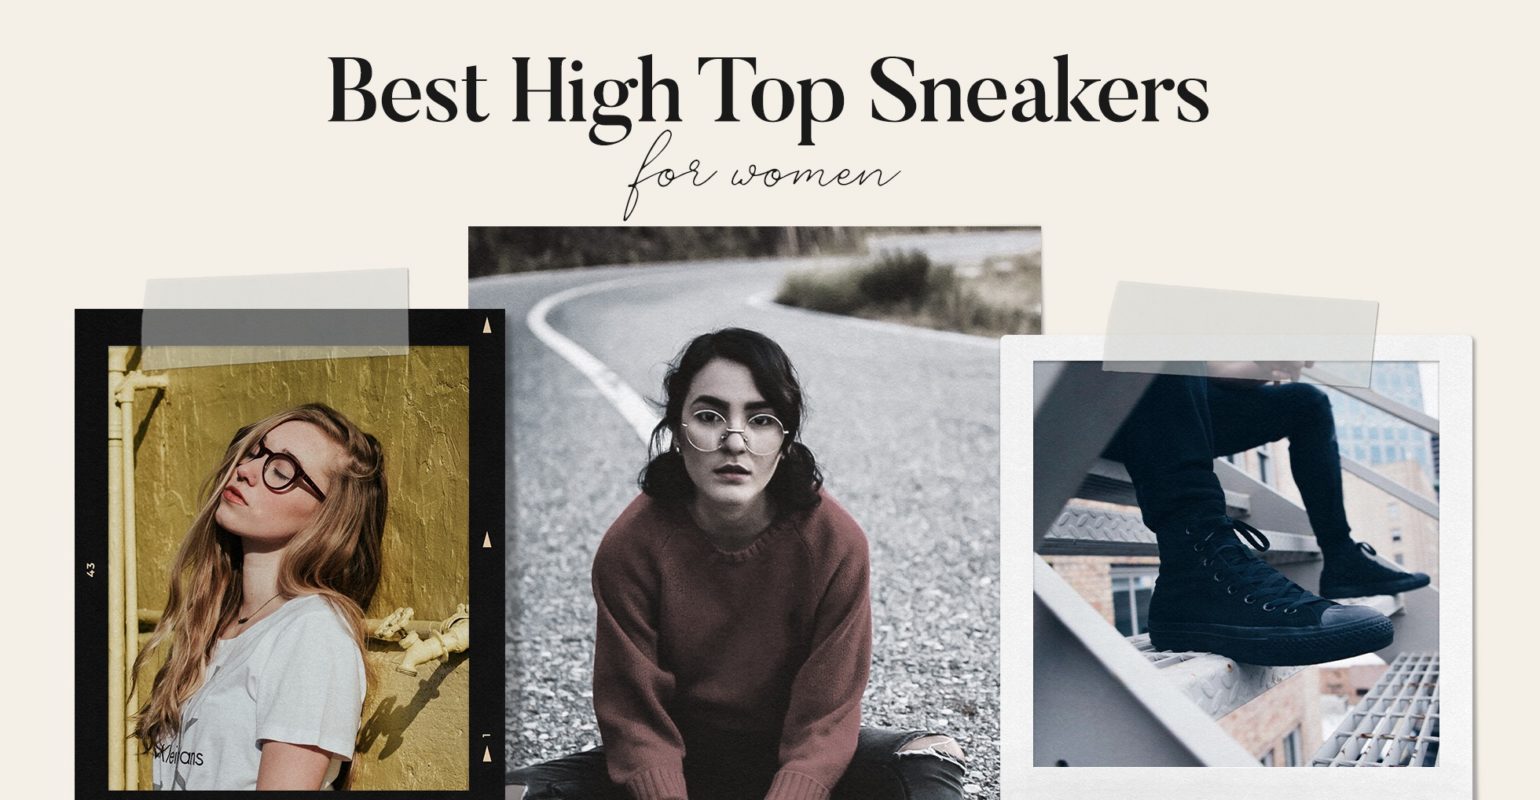 The Best High Top Sneakers for Women